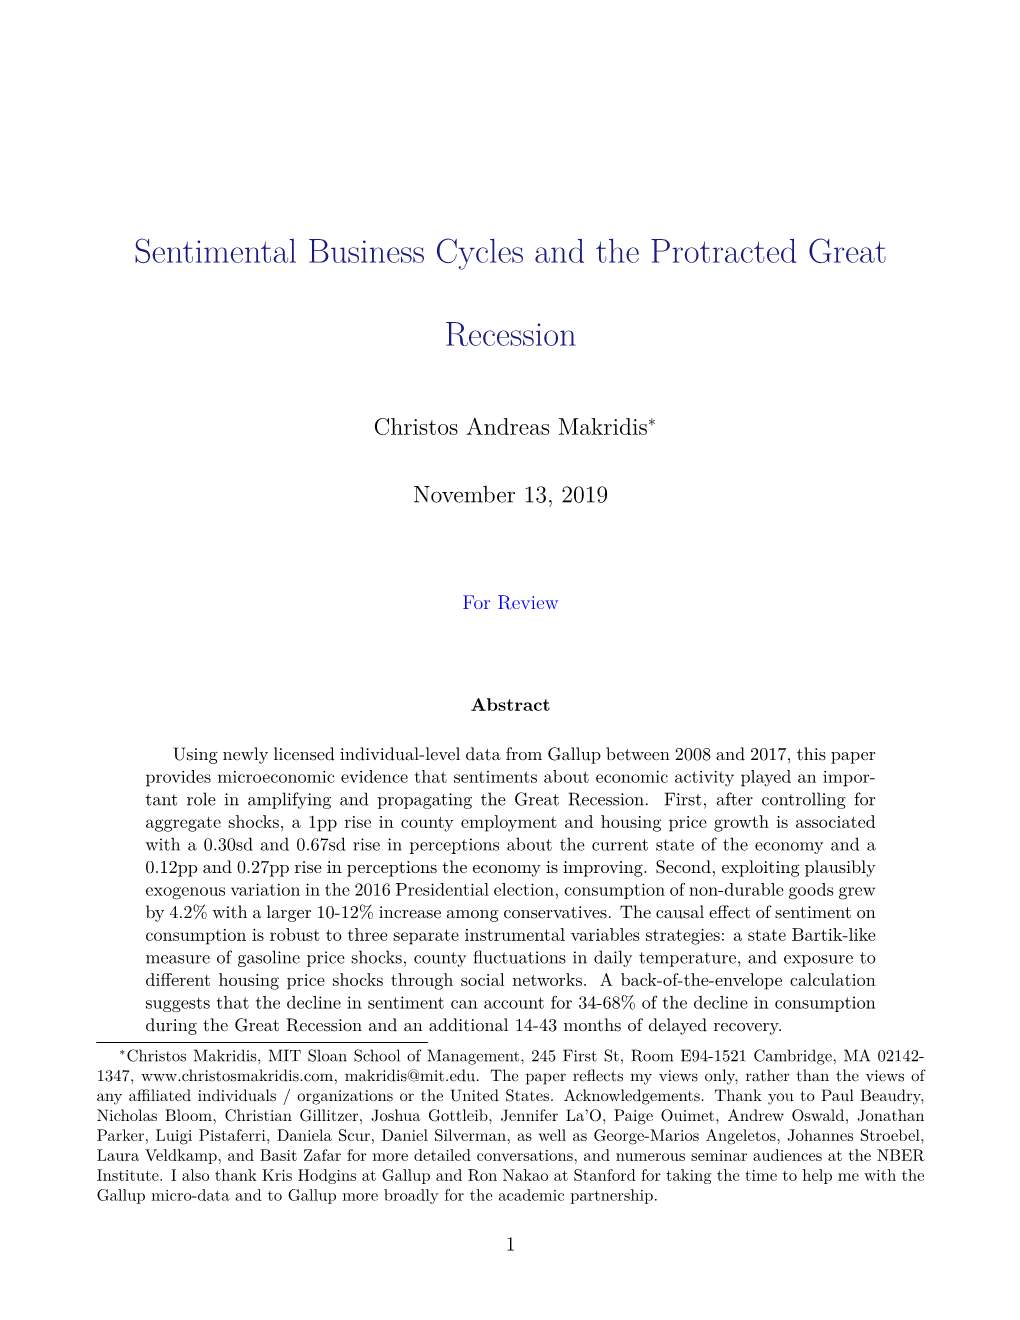 Sentimental Business Cycles and the Protracted Great Recession